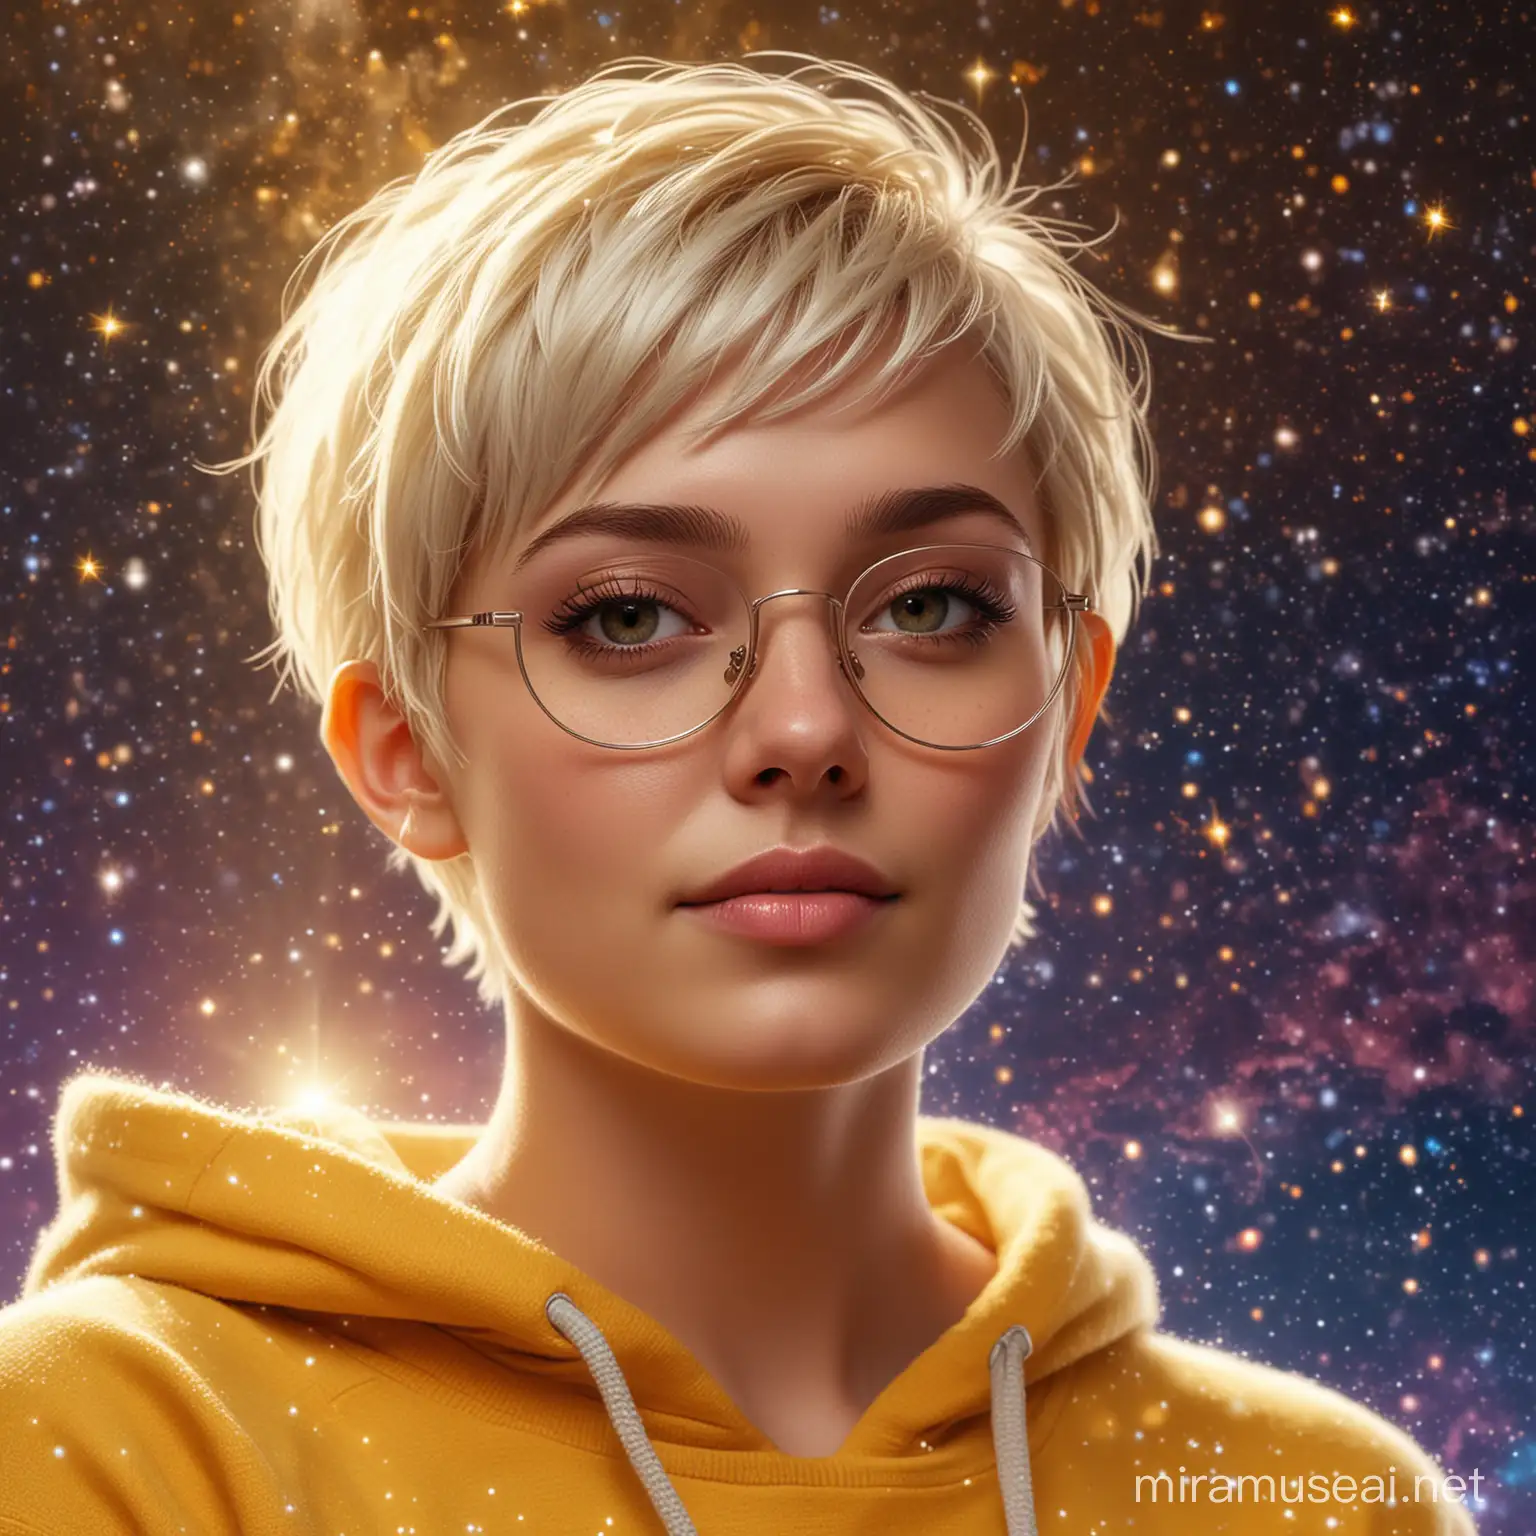 High detail, super detail, super high resolution, a beautiful white young woman with a short blonde pixie cut, wearing sunglasses, wearing a yellow hoodie, enjoying her time in a dream galaxy, surrounded by stars, warm light shining on her, the background is a starry sky with galaxies colorful and galaxy clouds, stars flying all around, delicate face, adding a cheerful atmosphere,